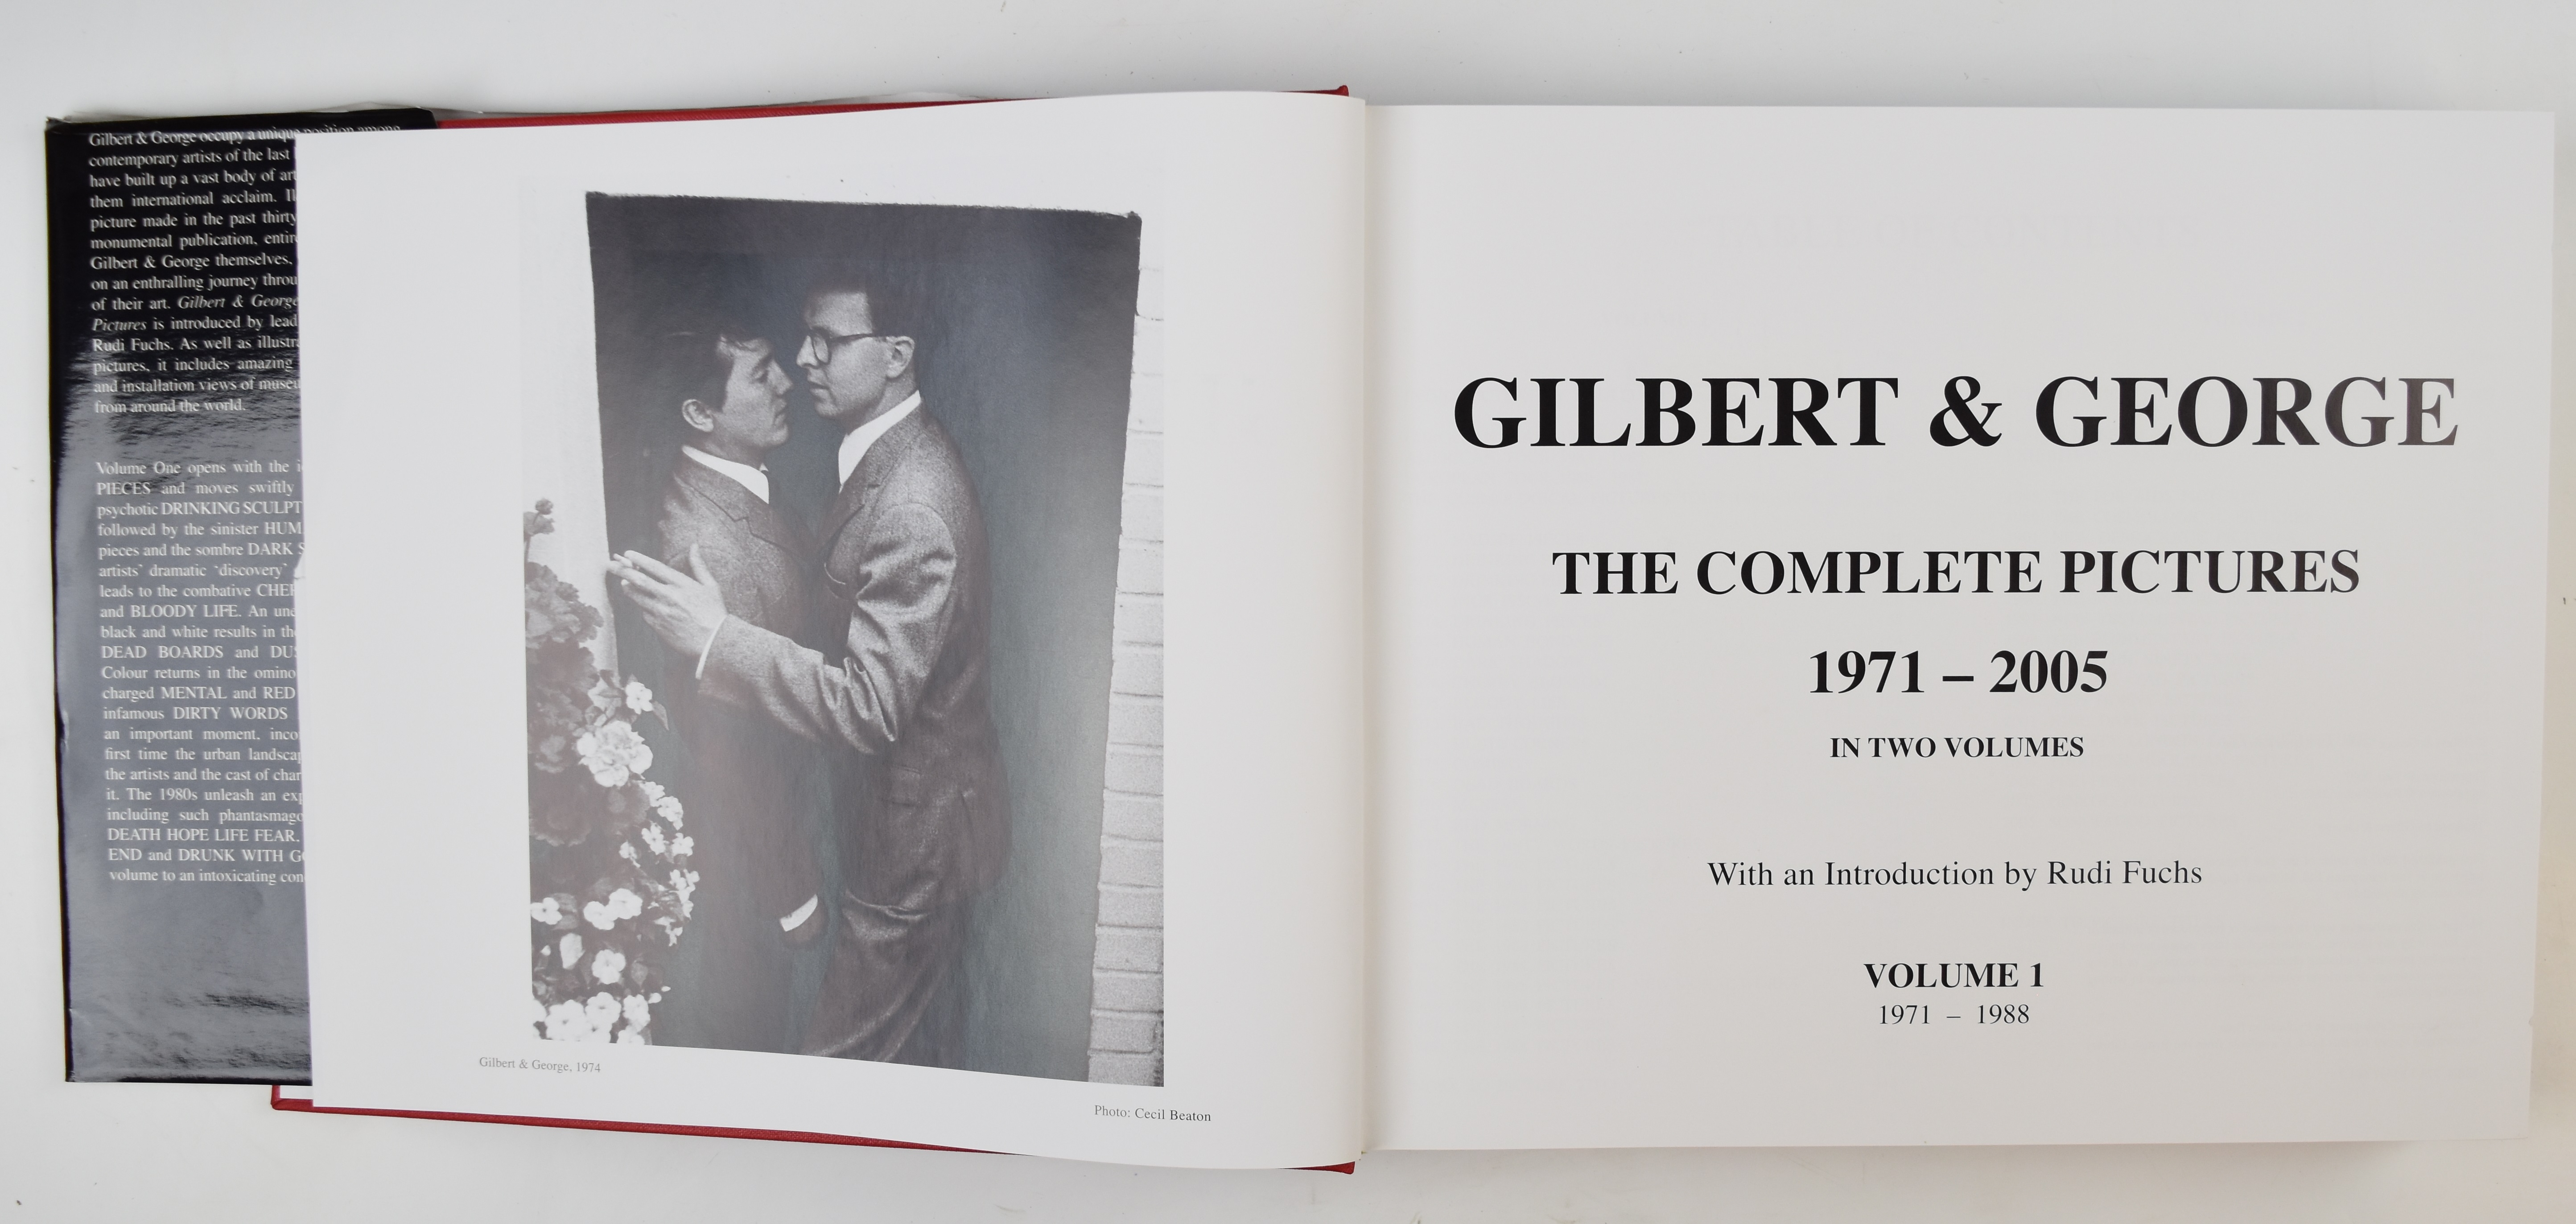 Gilbert & George The Complete Pictures 1971-2005 in 2 volumes with an introduction by Rudi Fuchs, - Image 3 of 5